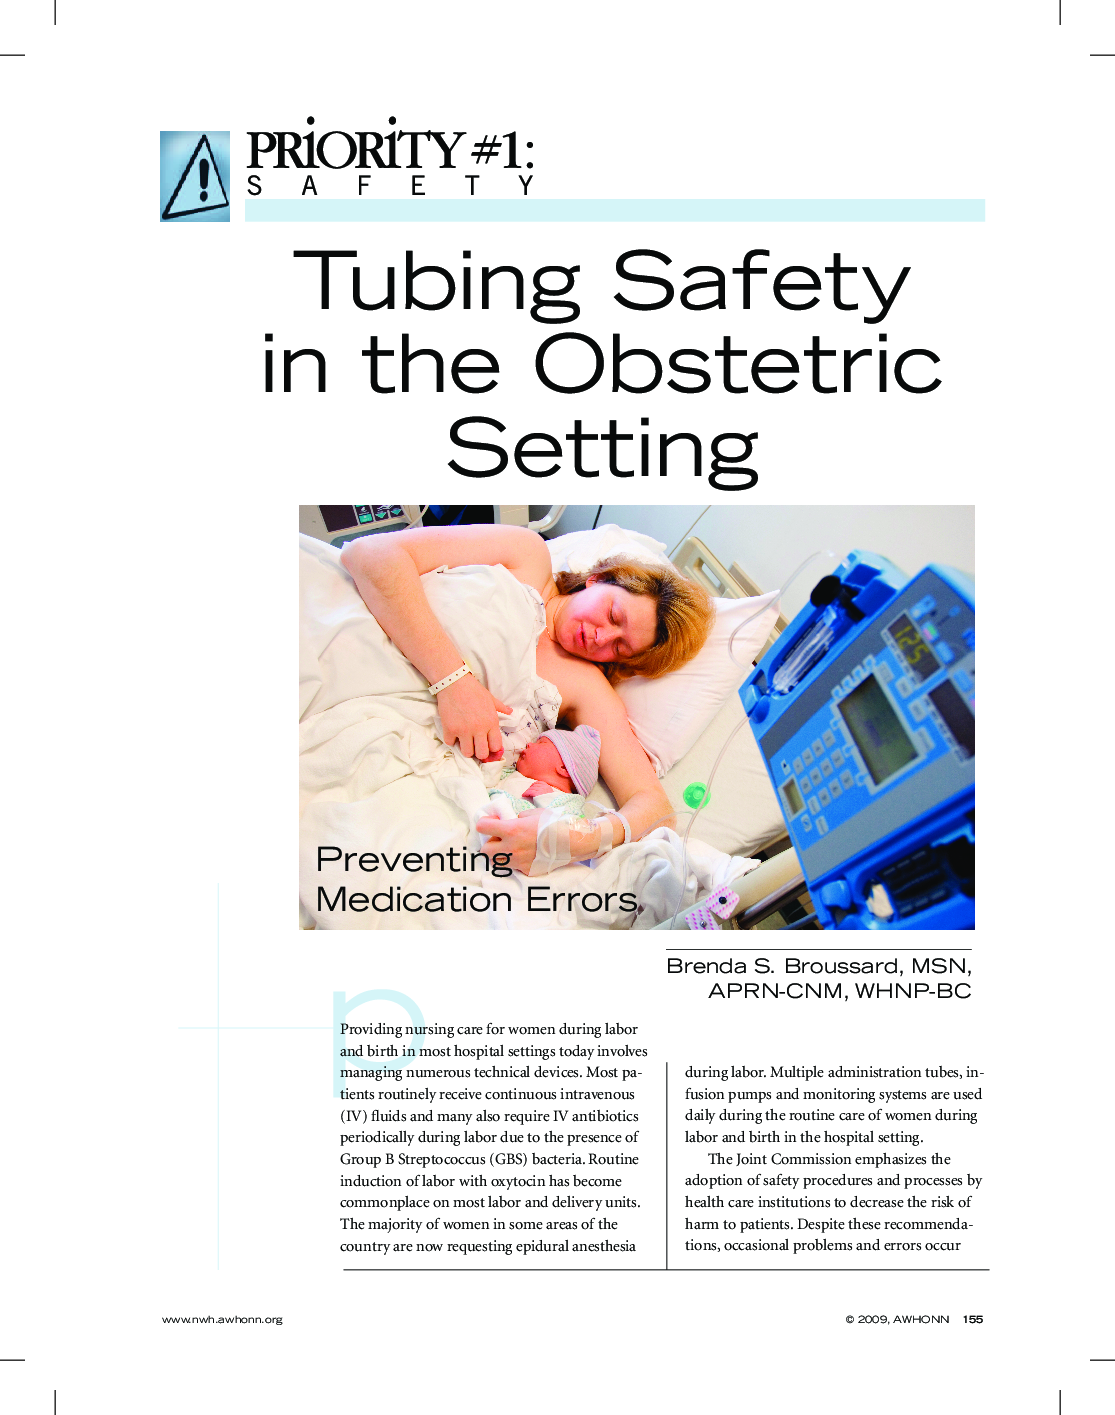 Tubing Safety in the Obstetric Setting: Preventing Medication Errors